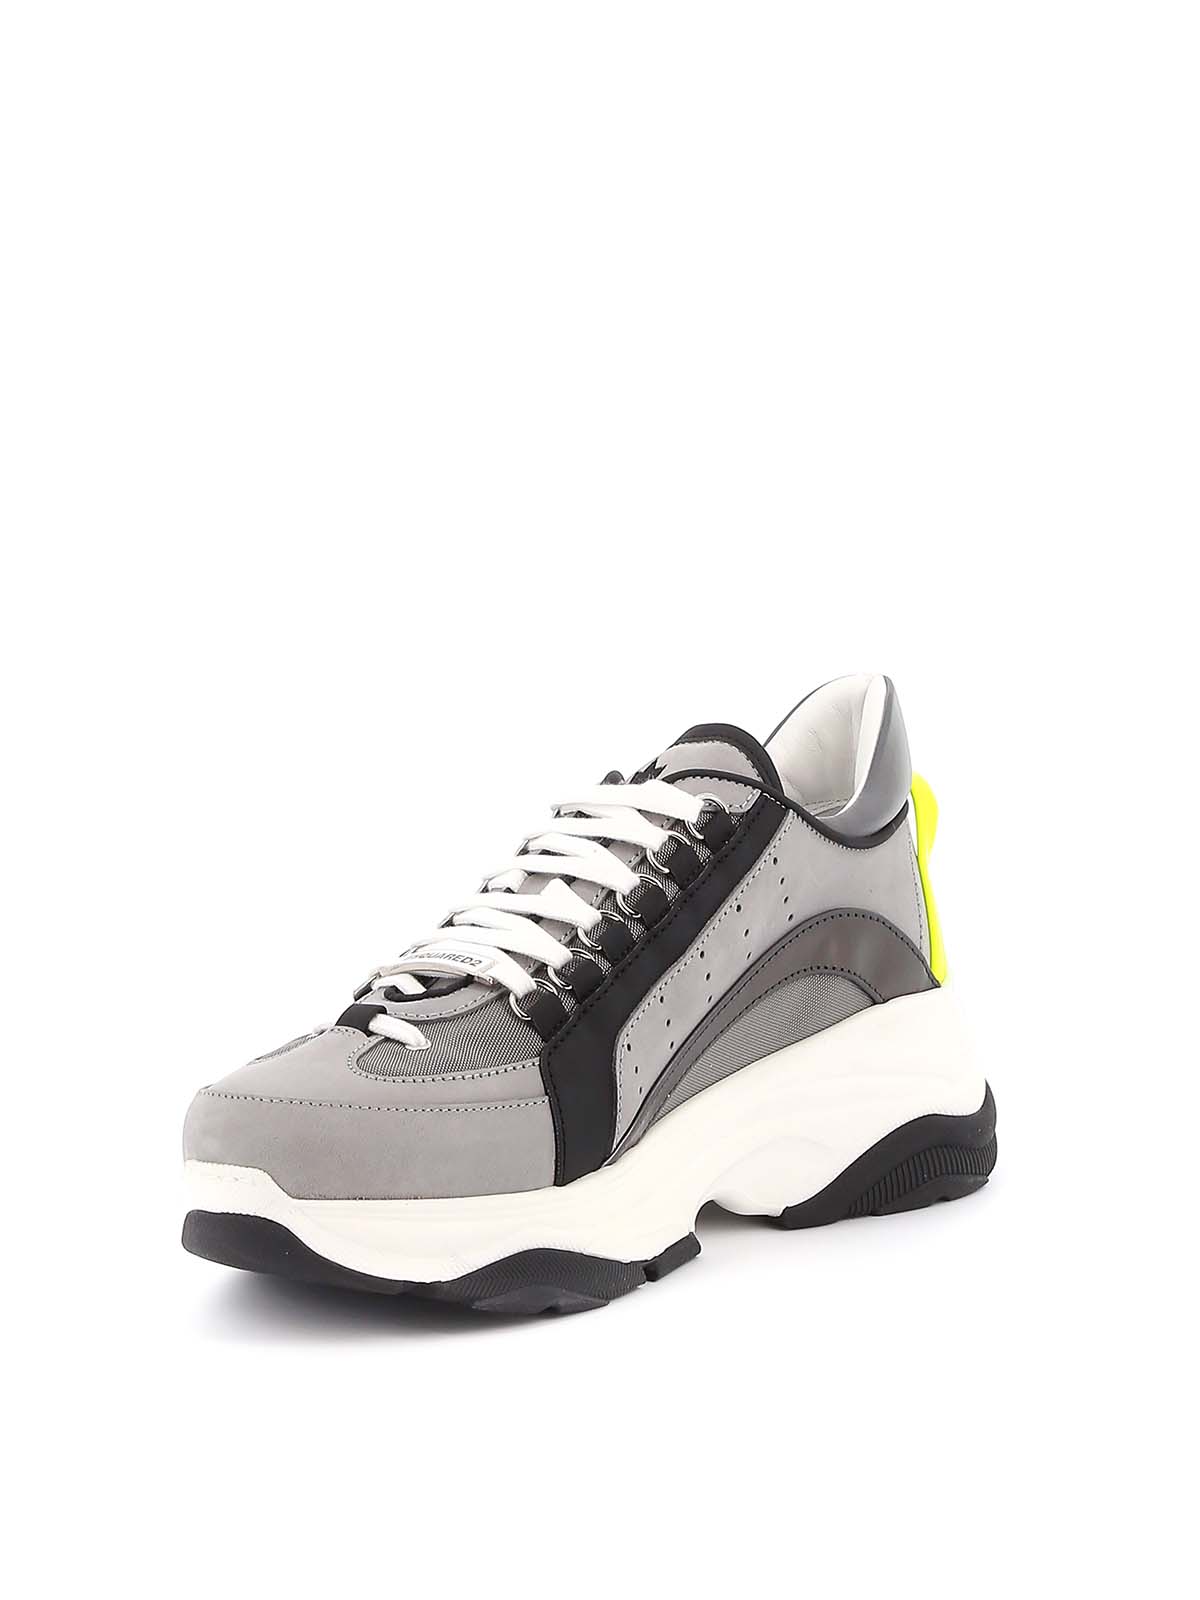 dsquared2 bumpy 551 sneakers